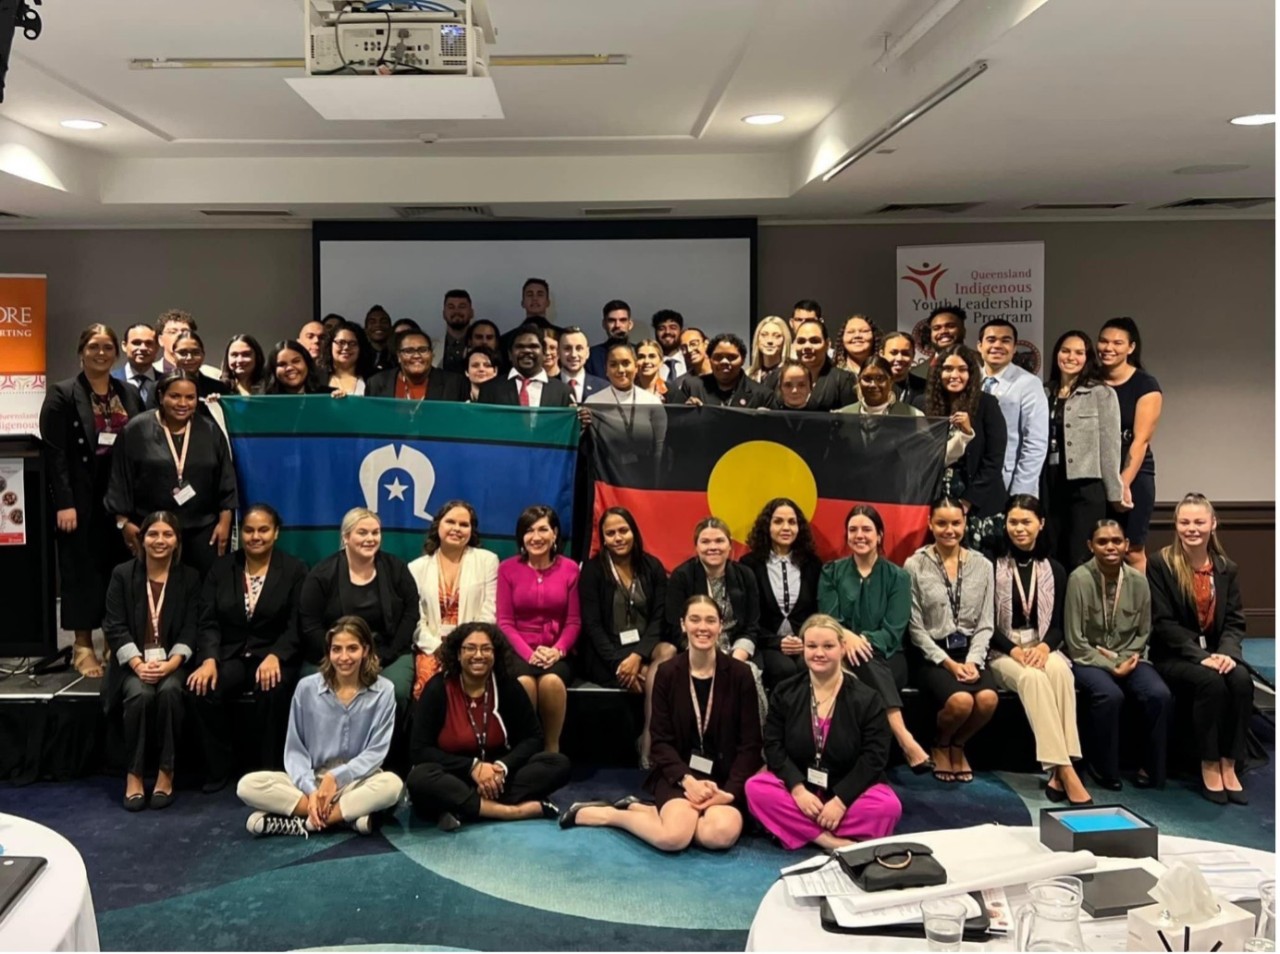 Participants of the QLD Indigenous Youth Leadership Program with Quandamooka woman and QLD Minister for Communities and Housing The Hon. Leeanne Enoch MP.